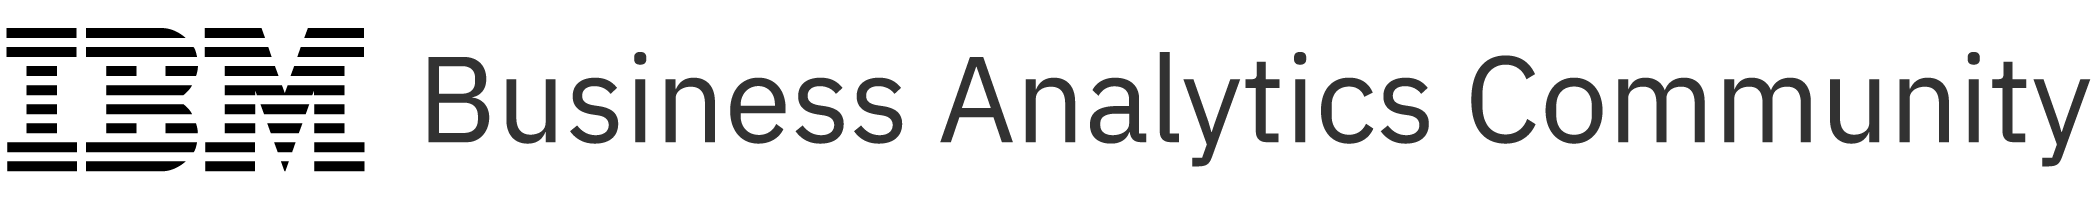 (Deprecated) Business Analytics logo. This will take you to the homepage